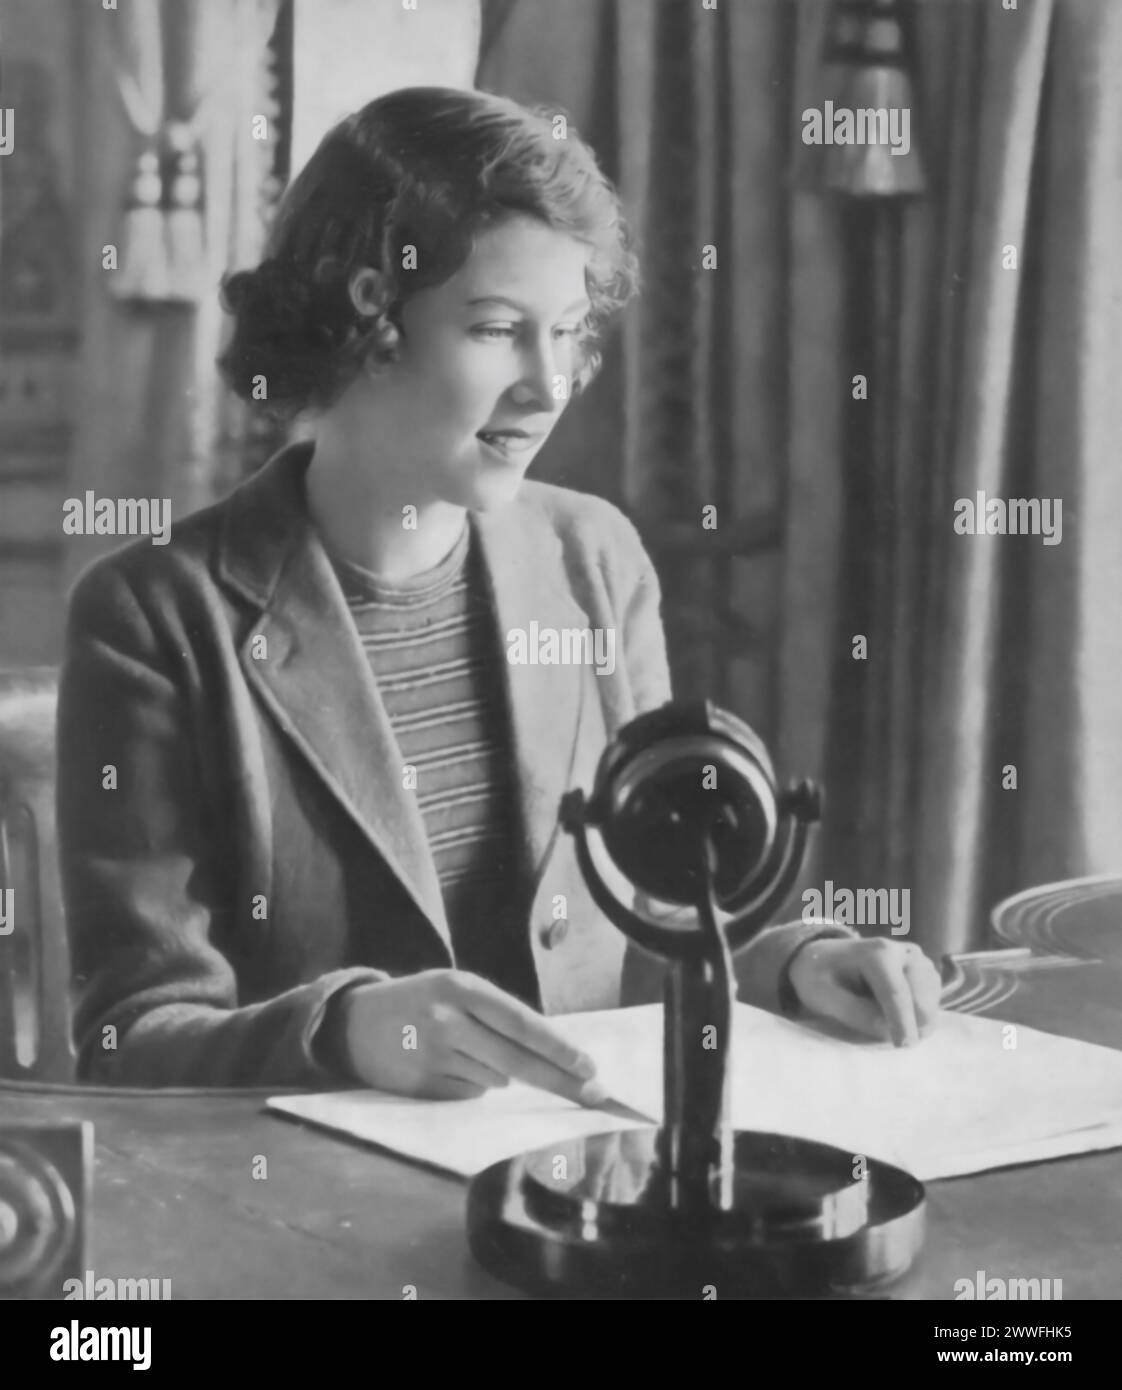 A photograph captures Princess Elizabeth II during her first radio broadcast in 1940, addressed to the 'Empire Children.' This historic moment showcases the young princess stepping into a public role, reaching out to children across the British Empire during a time of global conflict, marking her early contribution to royal duties and the war effort. Stock Photo